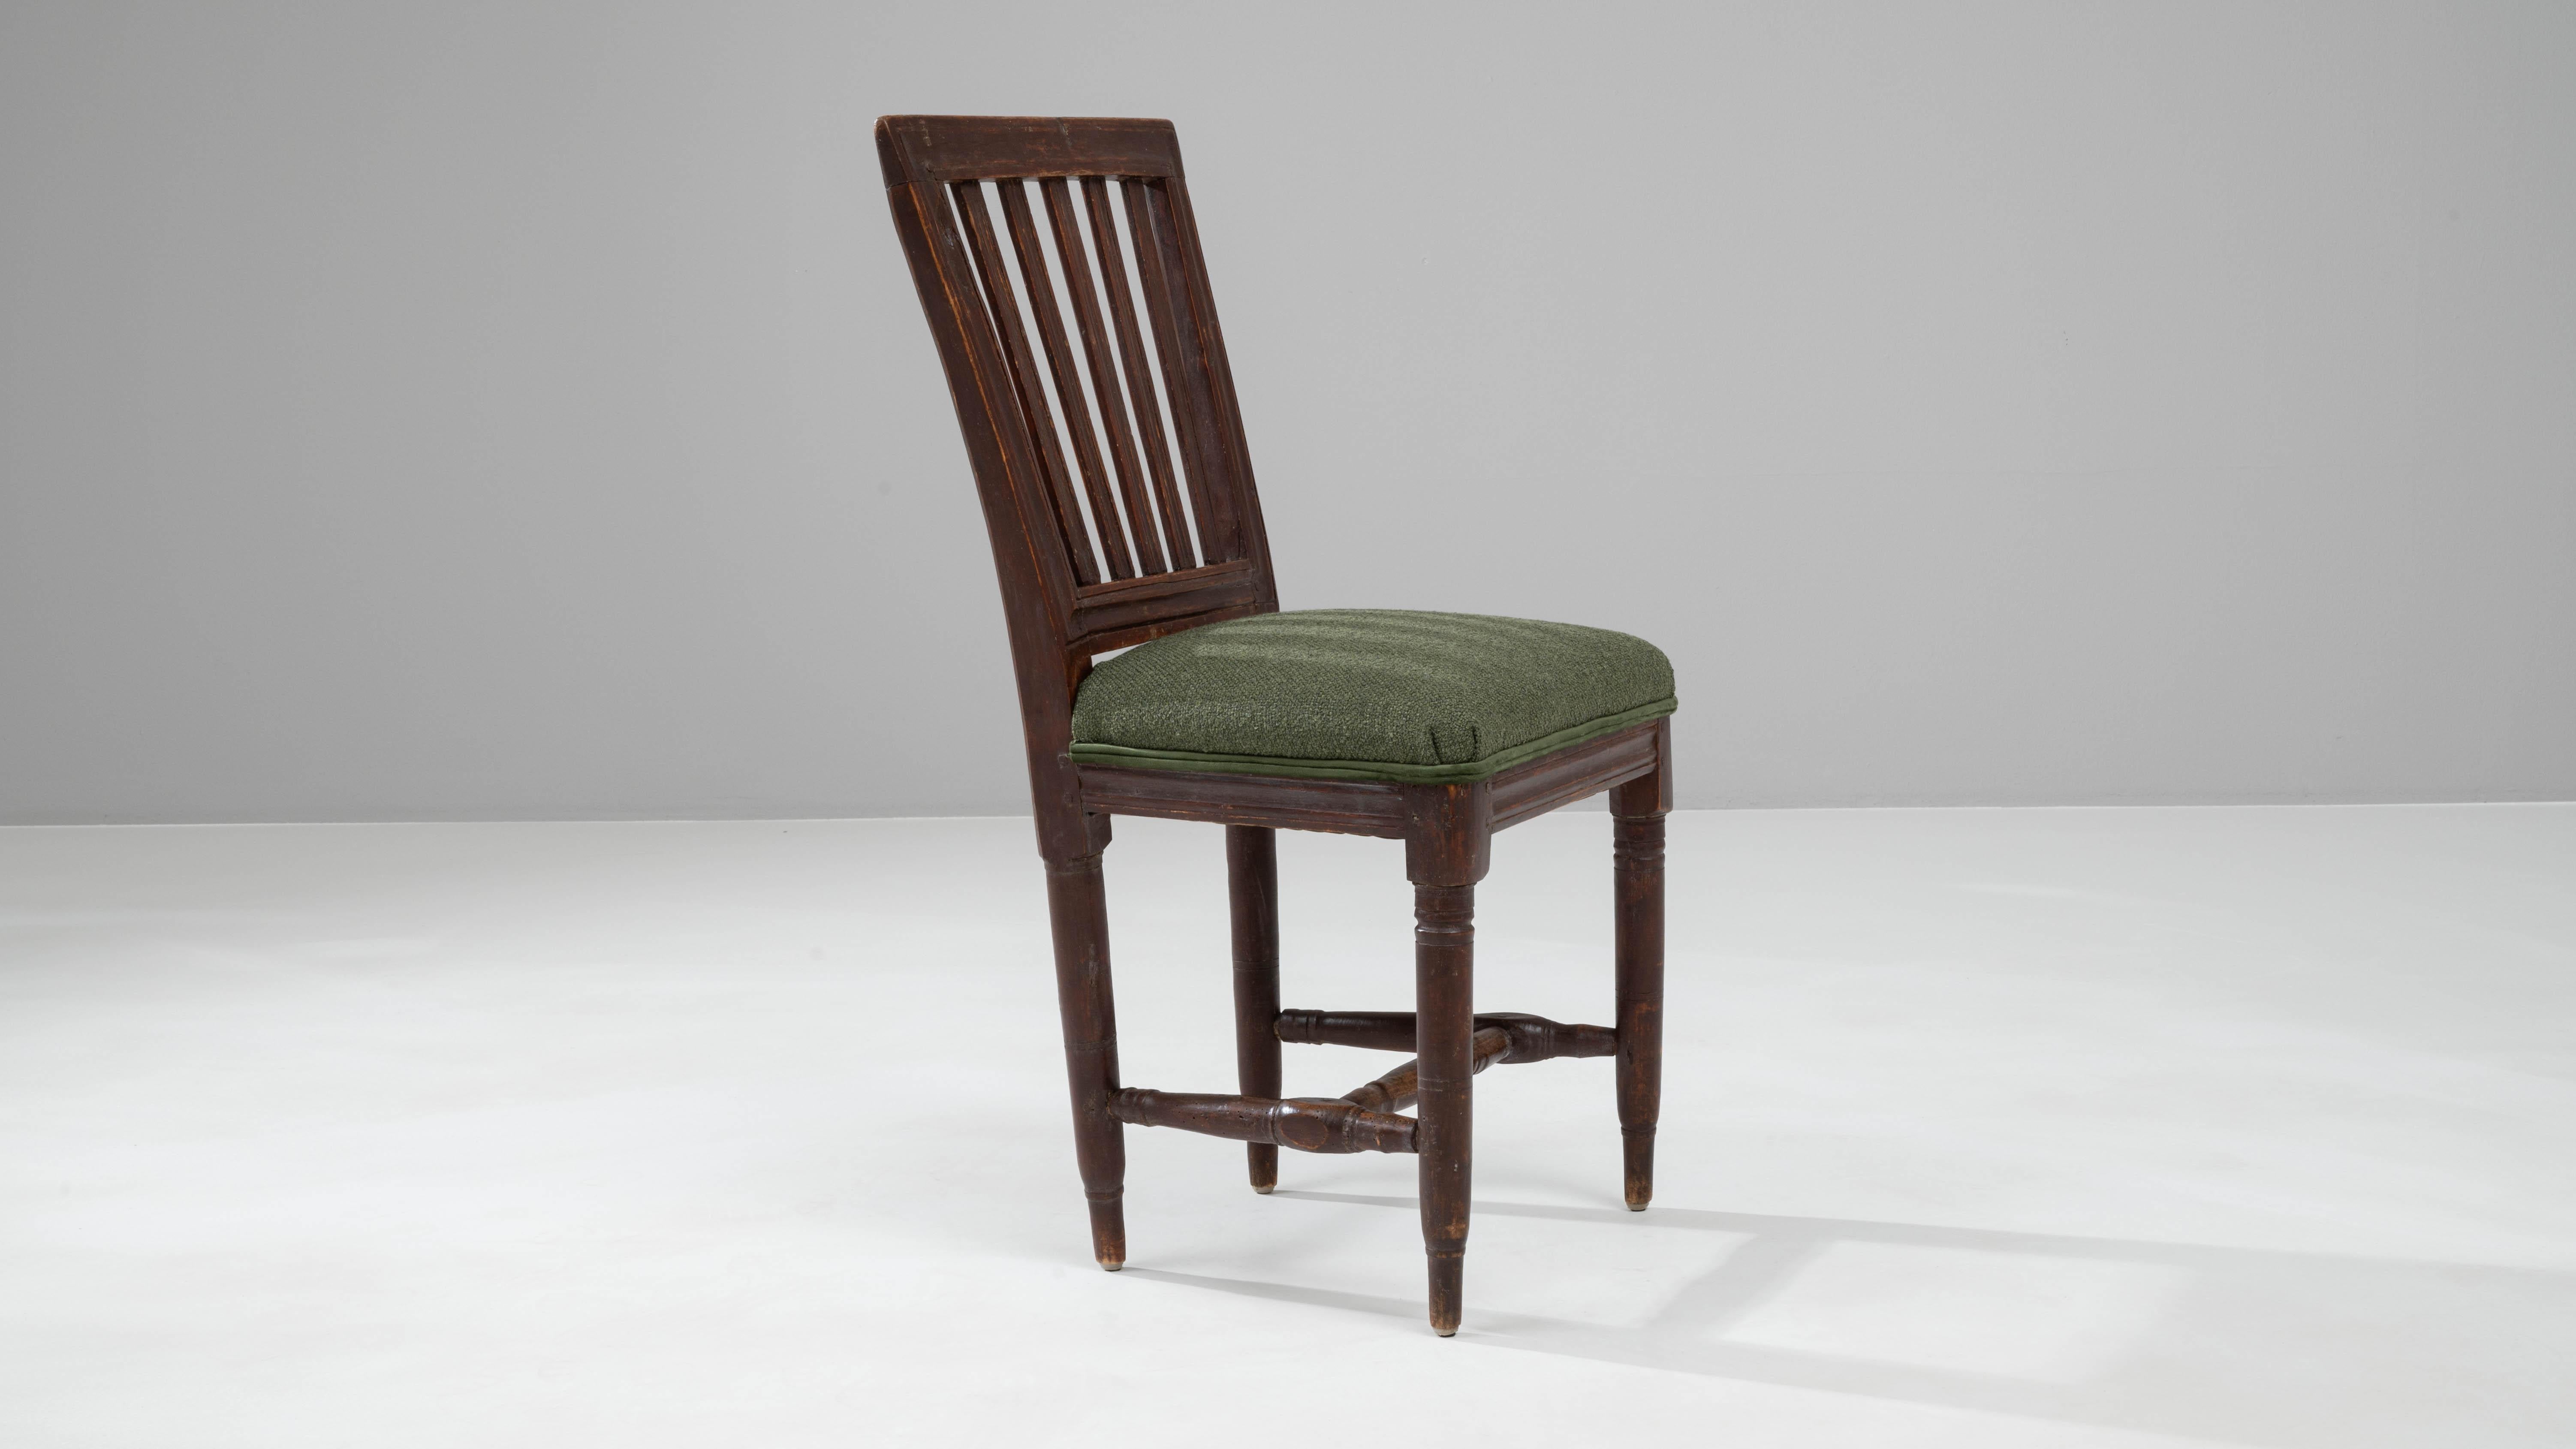 19th Century French Wooden Chair With Upholstered Seat For Sale 6